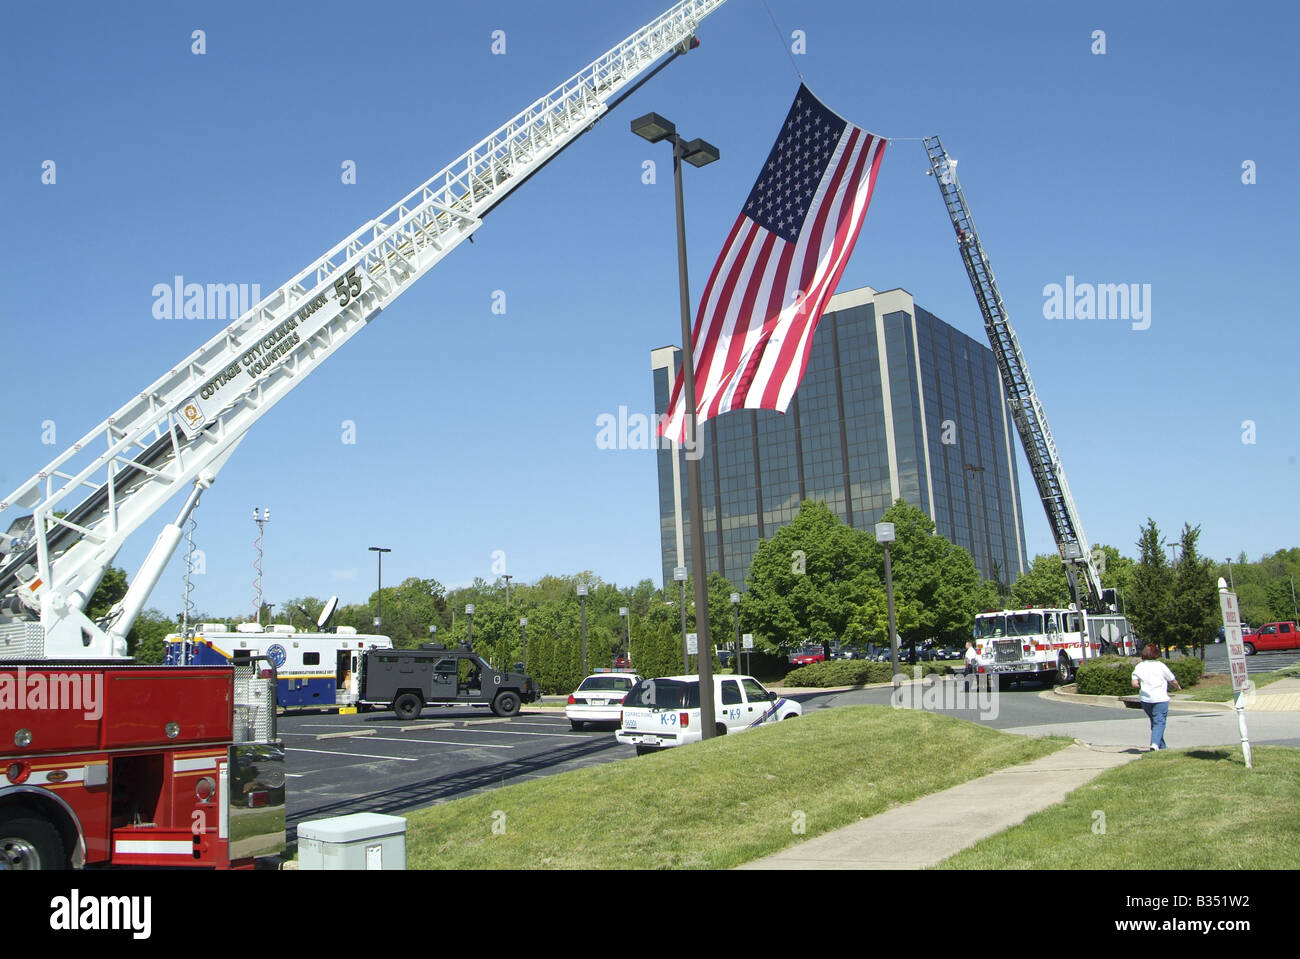 Fire Department ladder units frame an arch with an American flag in the middle  at the entrance to the Fire & Police Awards Stock Photo